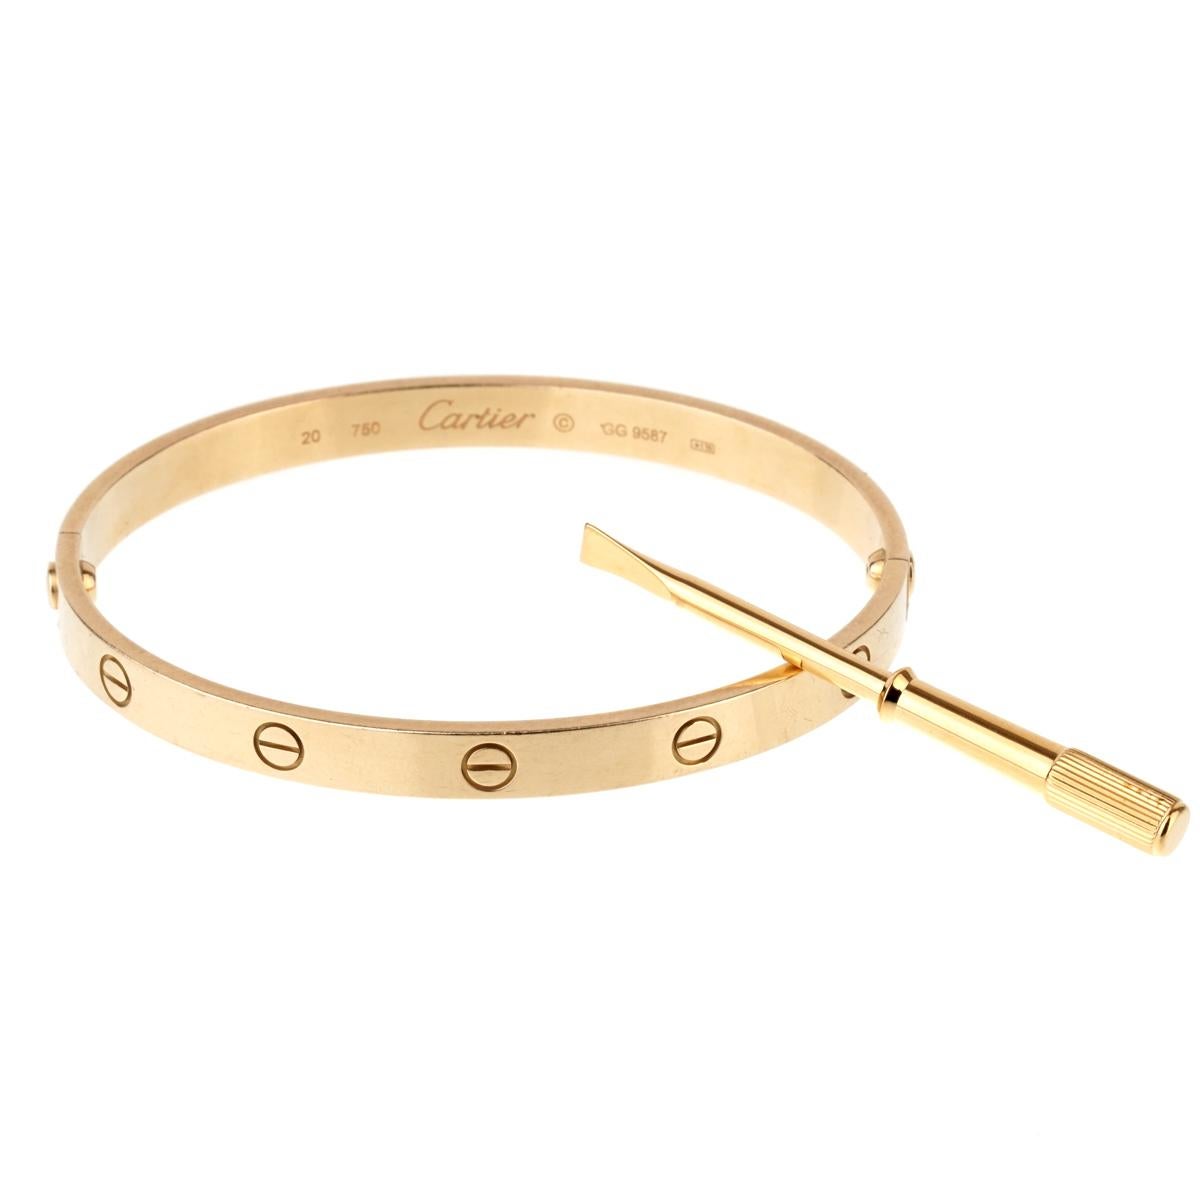 An iconic Cartier love bracelet in 18k yellow gold accompanied with the original screw driver. The bracelet is a size 20, and will fit a wrist upto 7.87